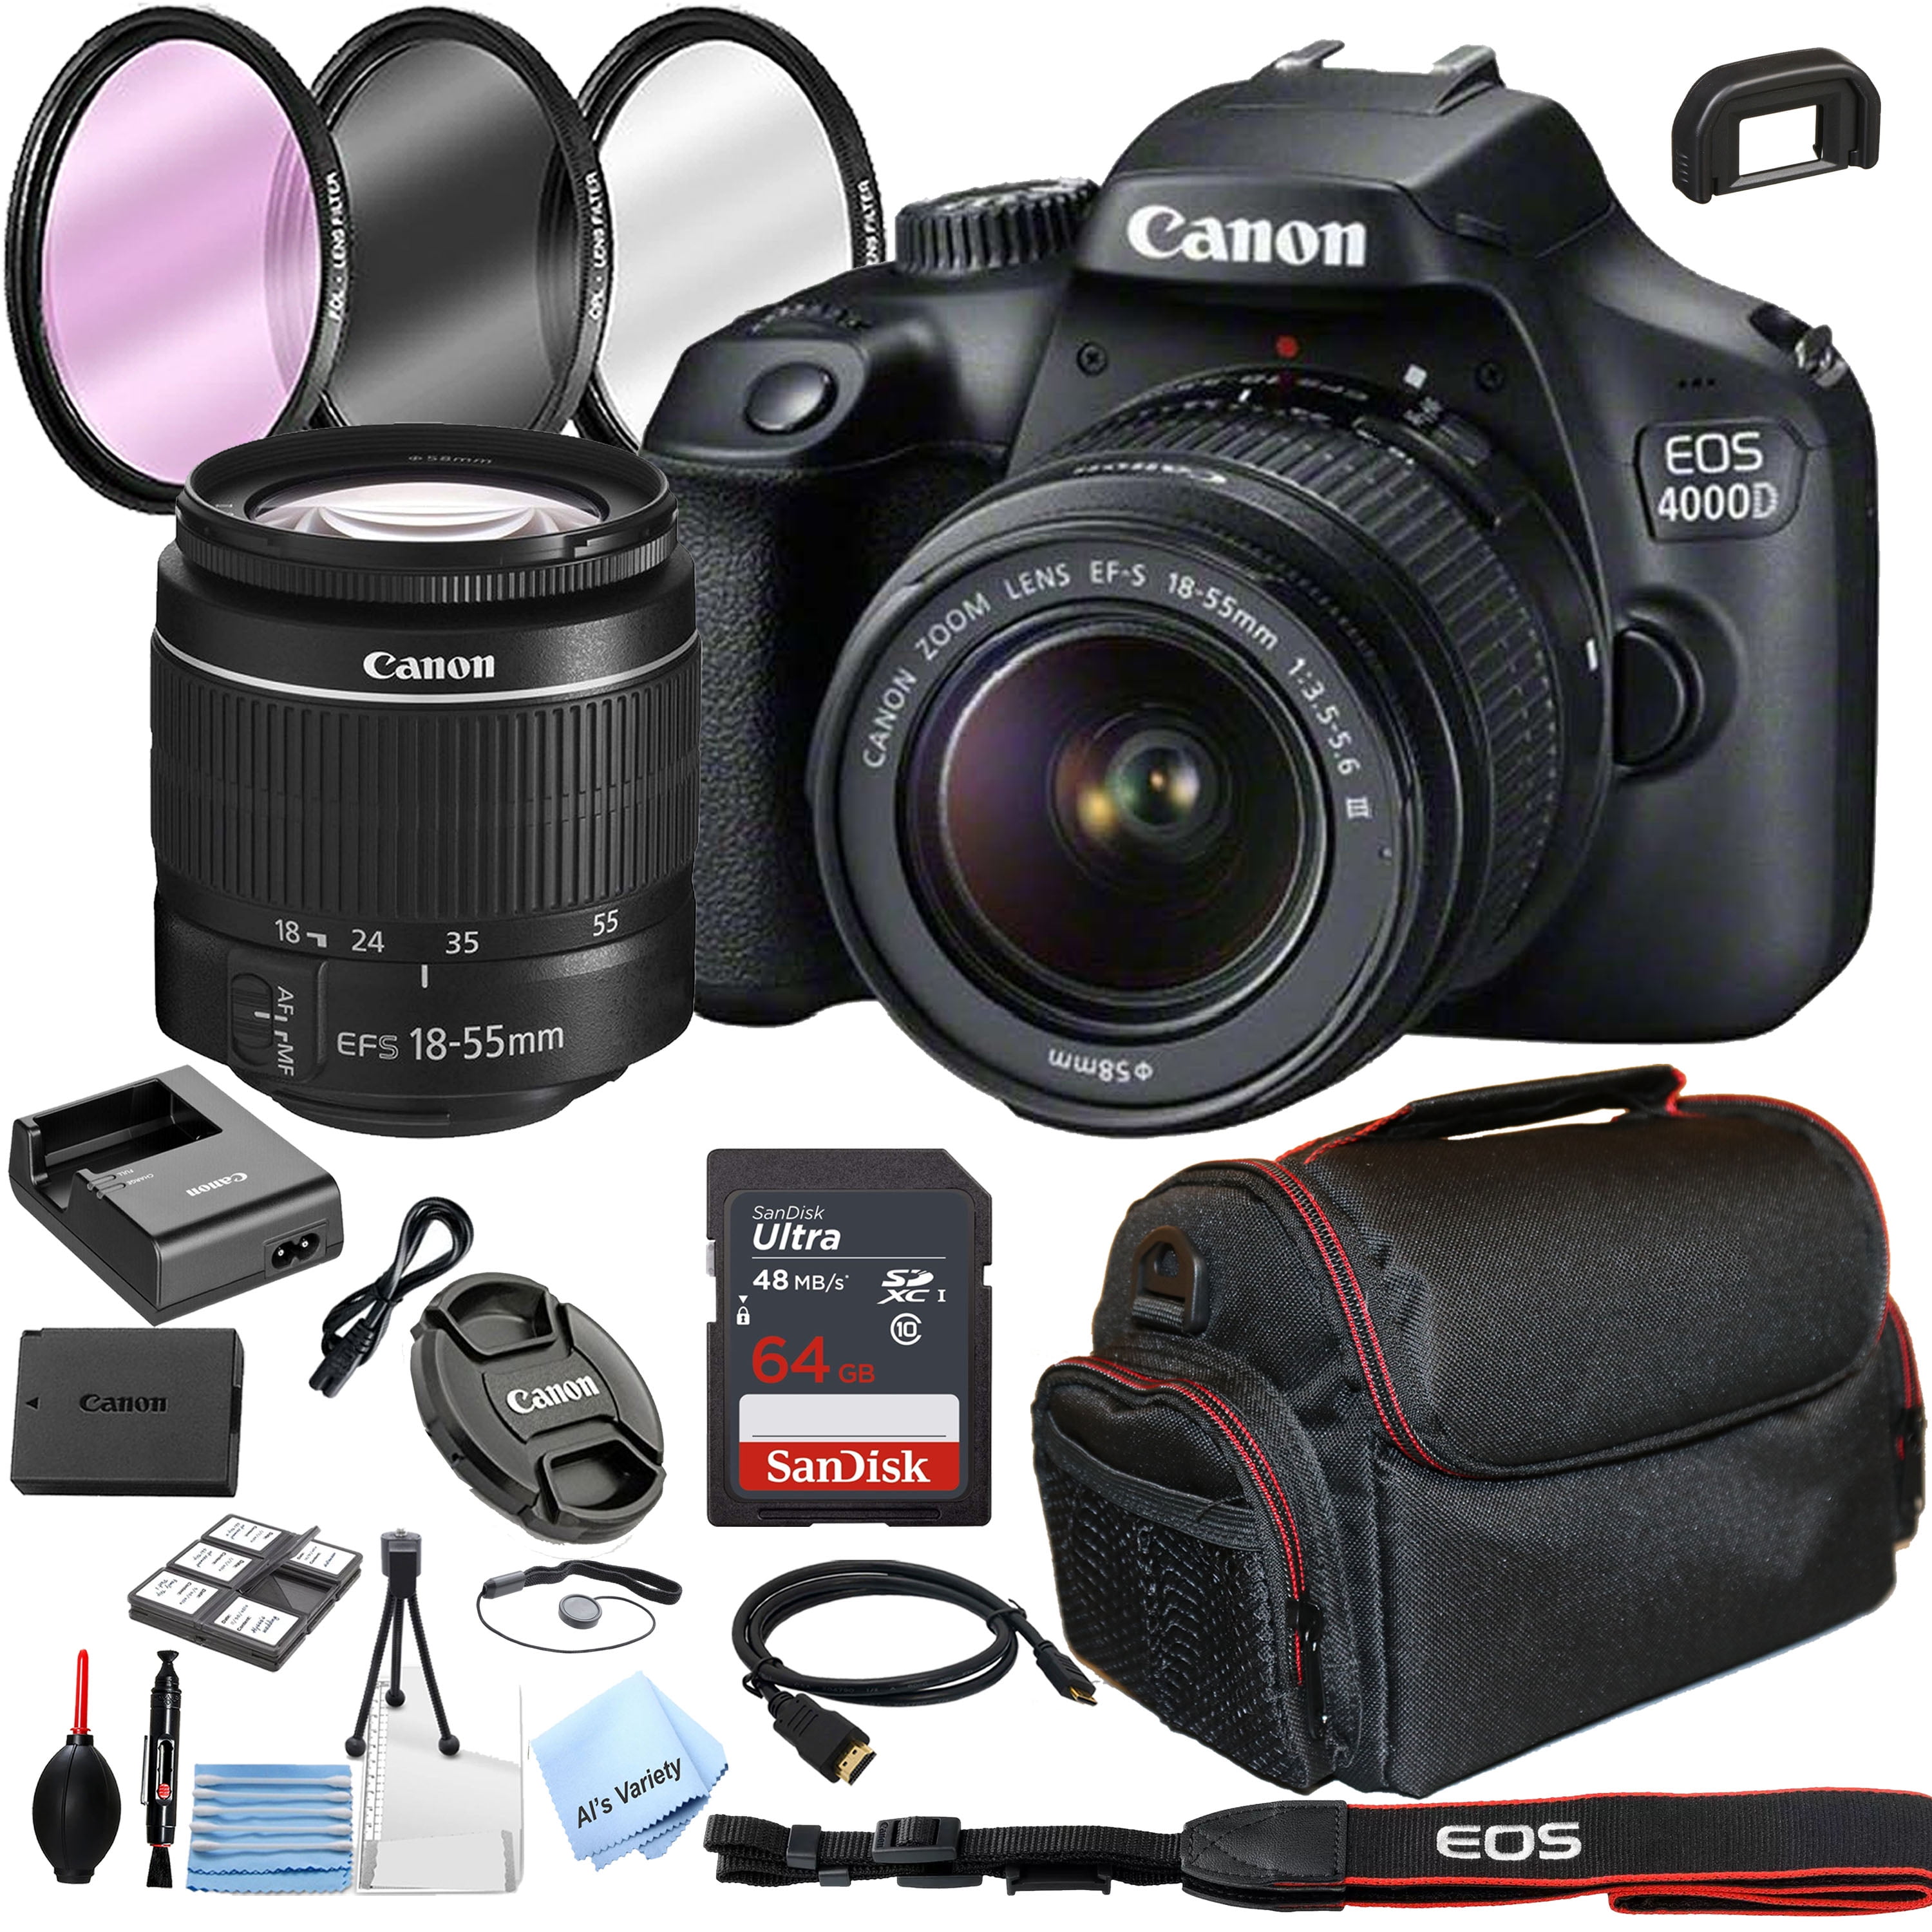 Canon EOS 4000D Rebel T100 DSLR Camera with 18-55mm + Optics Filter Set, Camera Bag + Sandisk Ultra 64GB Card + Al's Variety Cleaning Kit, And - Walmart.com